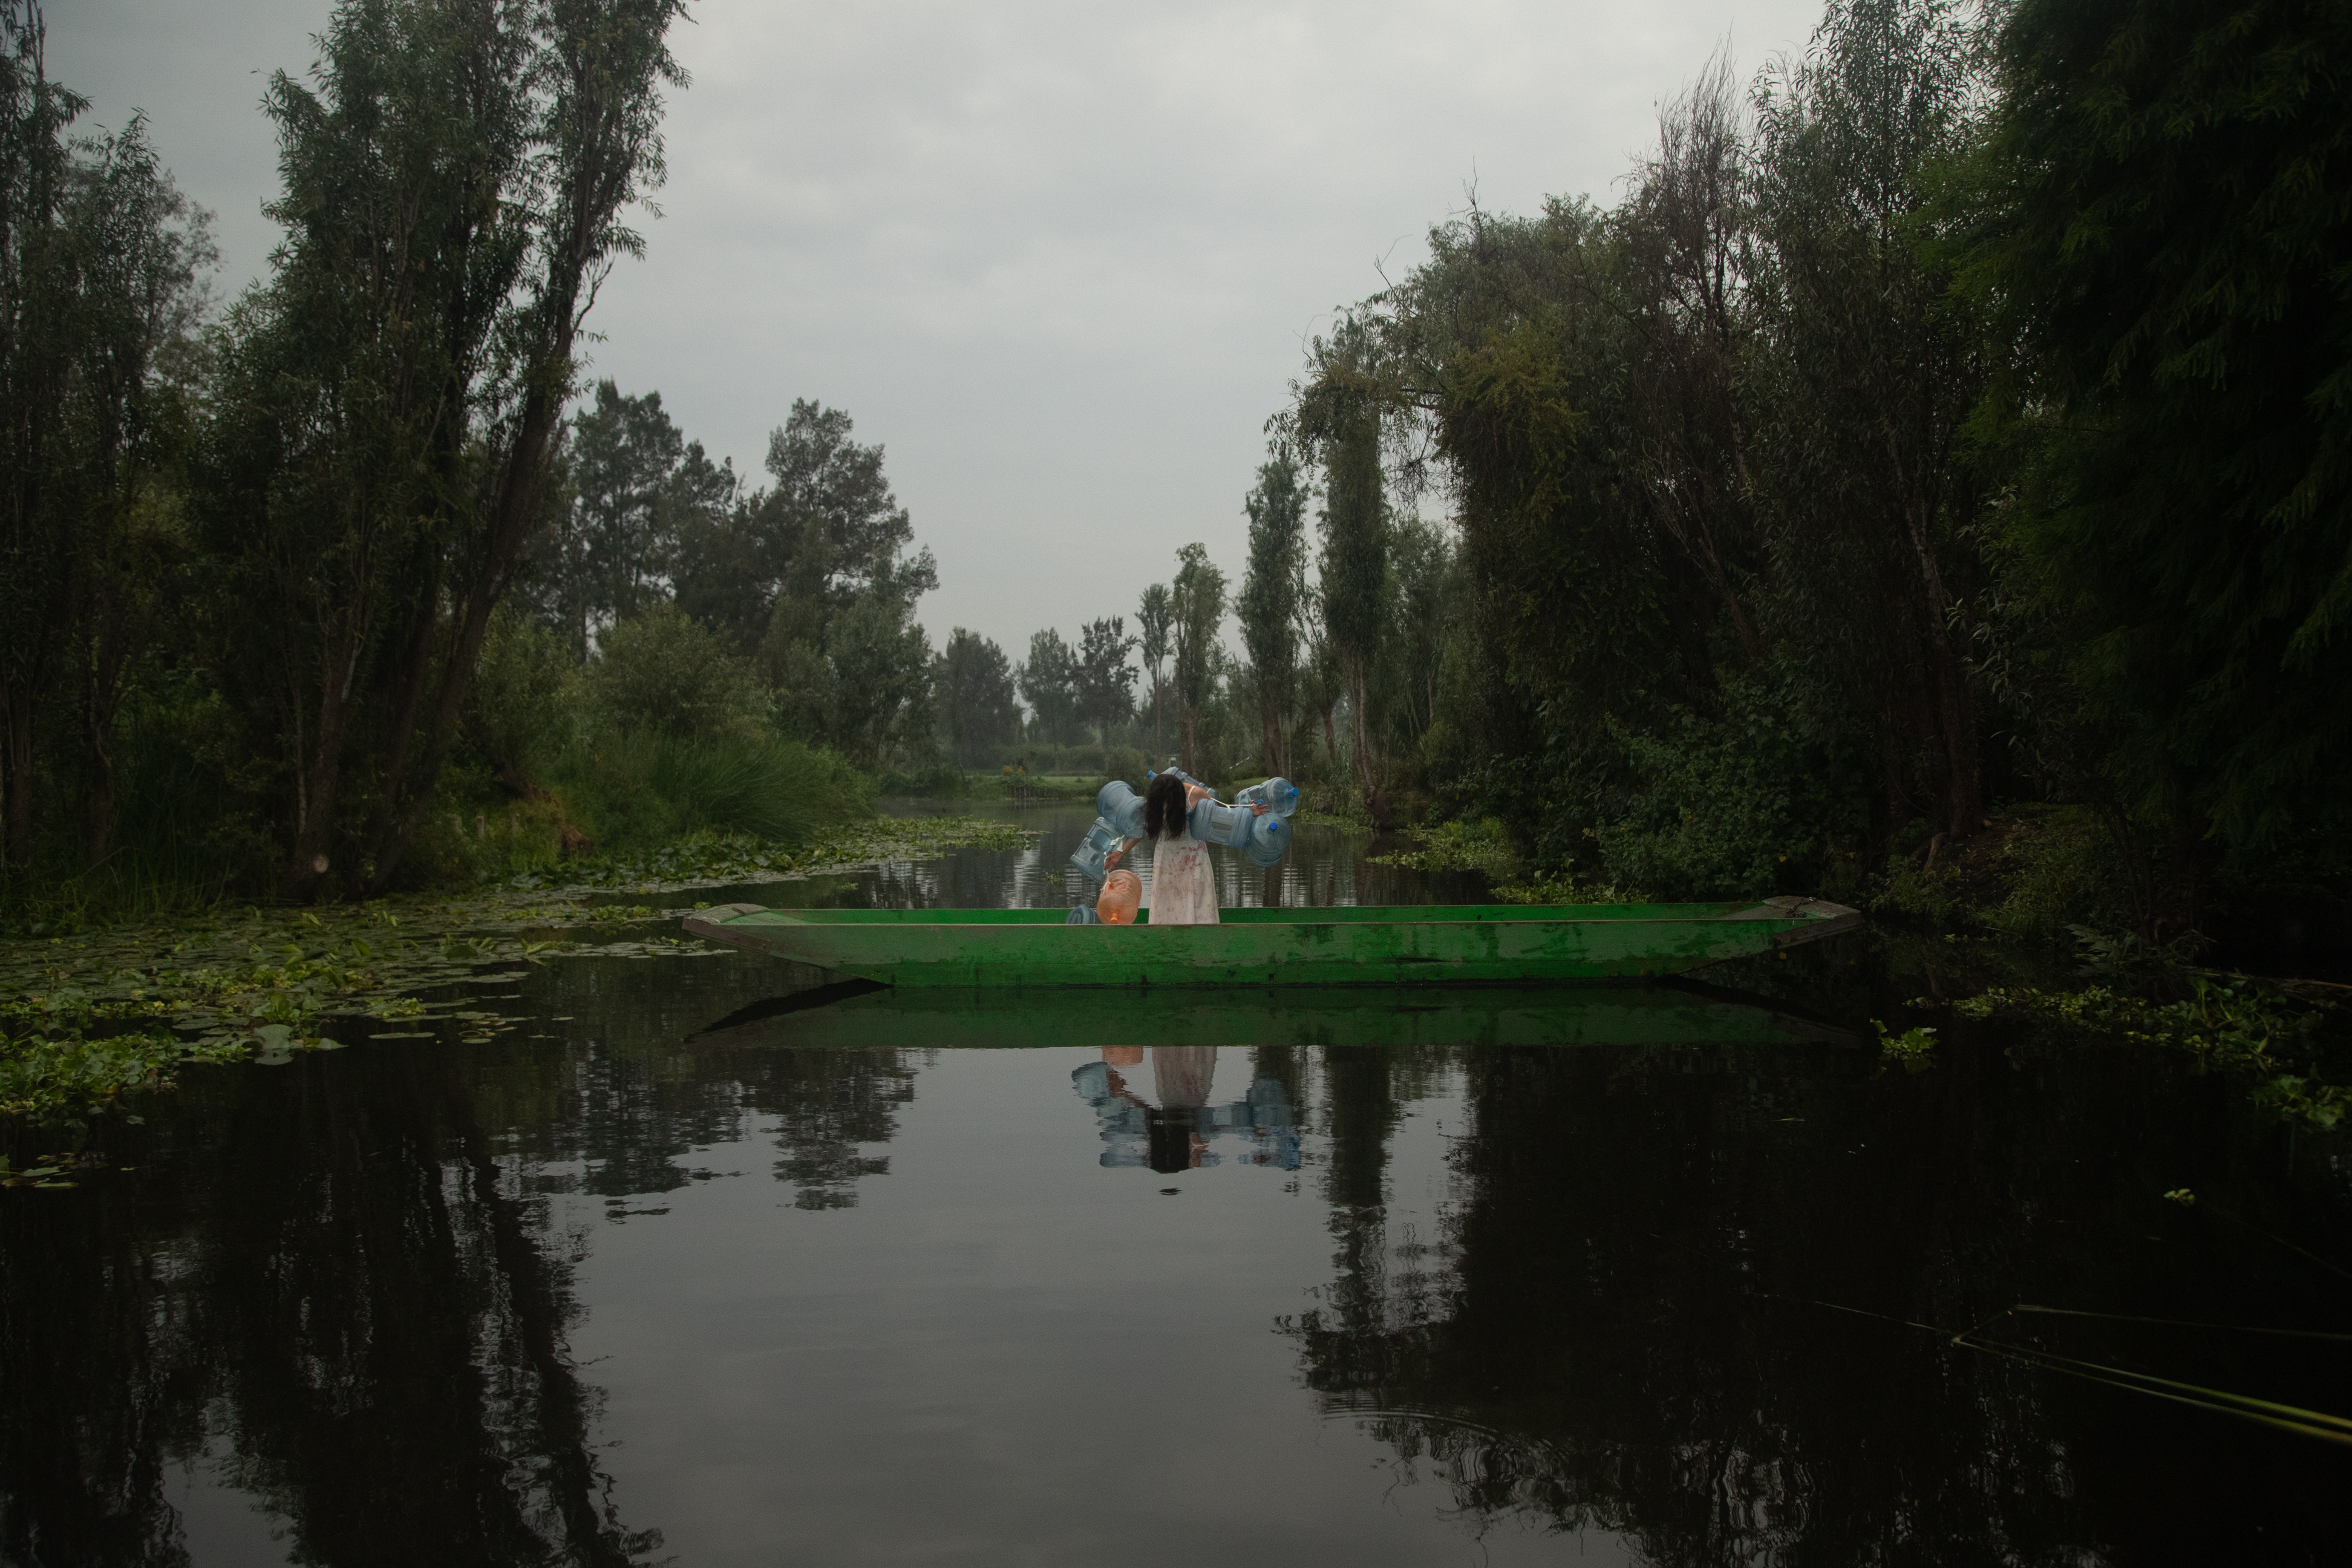 A dark green river flanked by lush green trees with lily pads floating atop the water. In the centre of the river, a long green canoe, a person stands inside, their shoulders adorned with six large blue plastic water containers. They hold an orange plastic water container in their right hand. Their head sags and their long black hair covers their face.